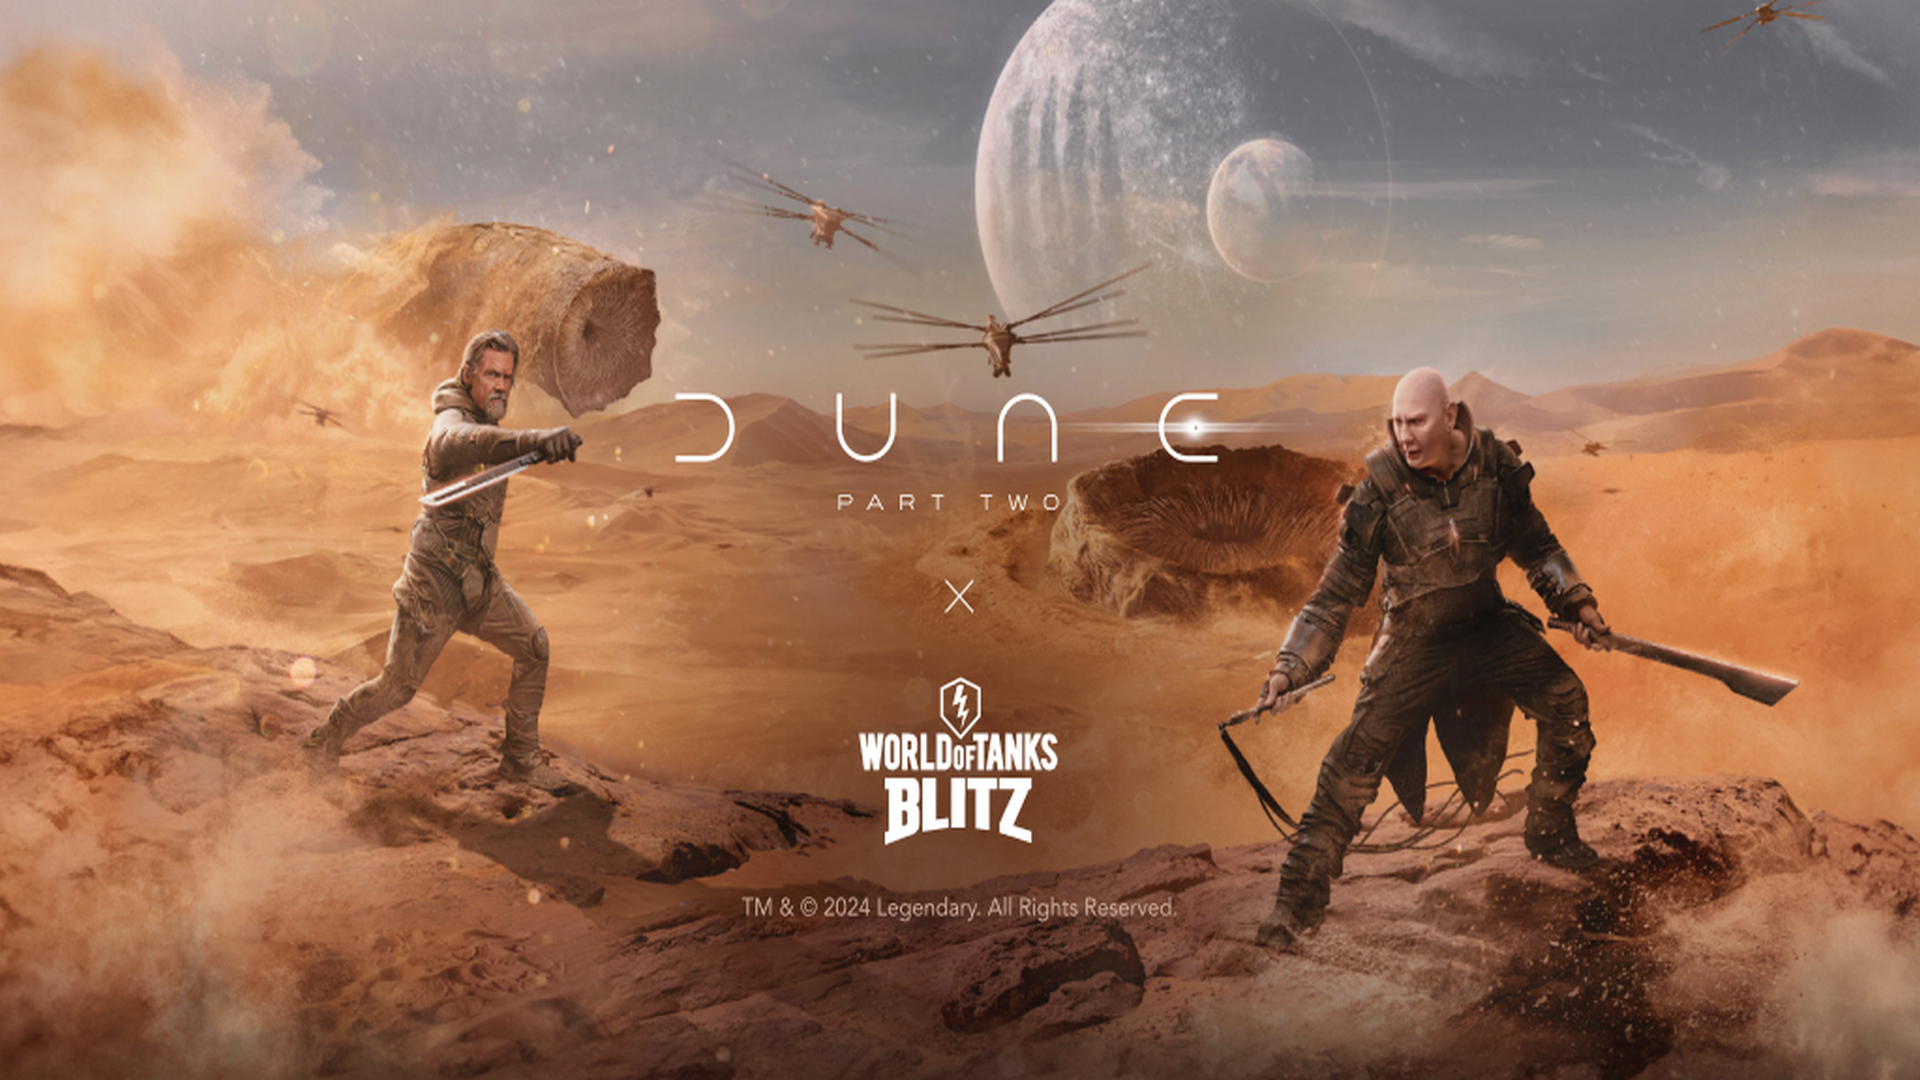 World of Tanks Blitz Launches a Planetary-Scale Event Inspired by Dune: Part Two Film